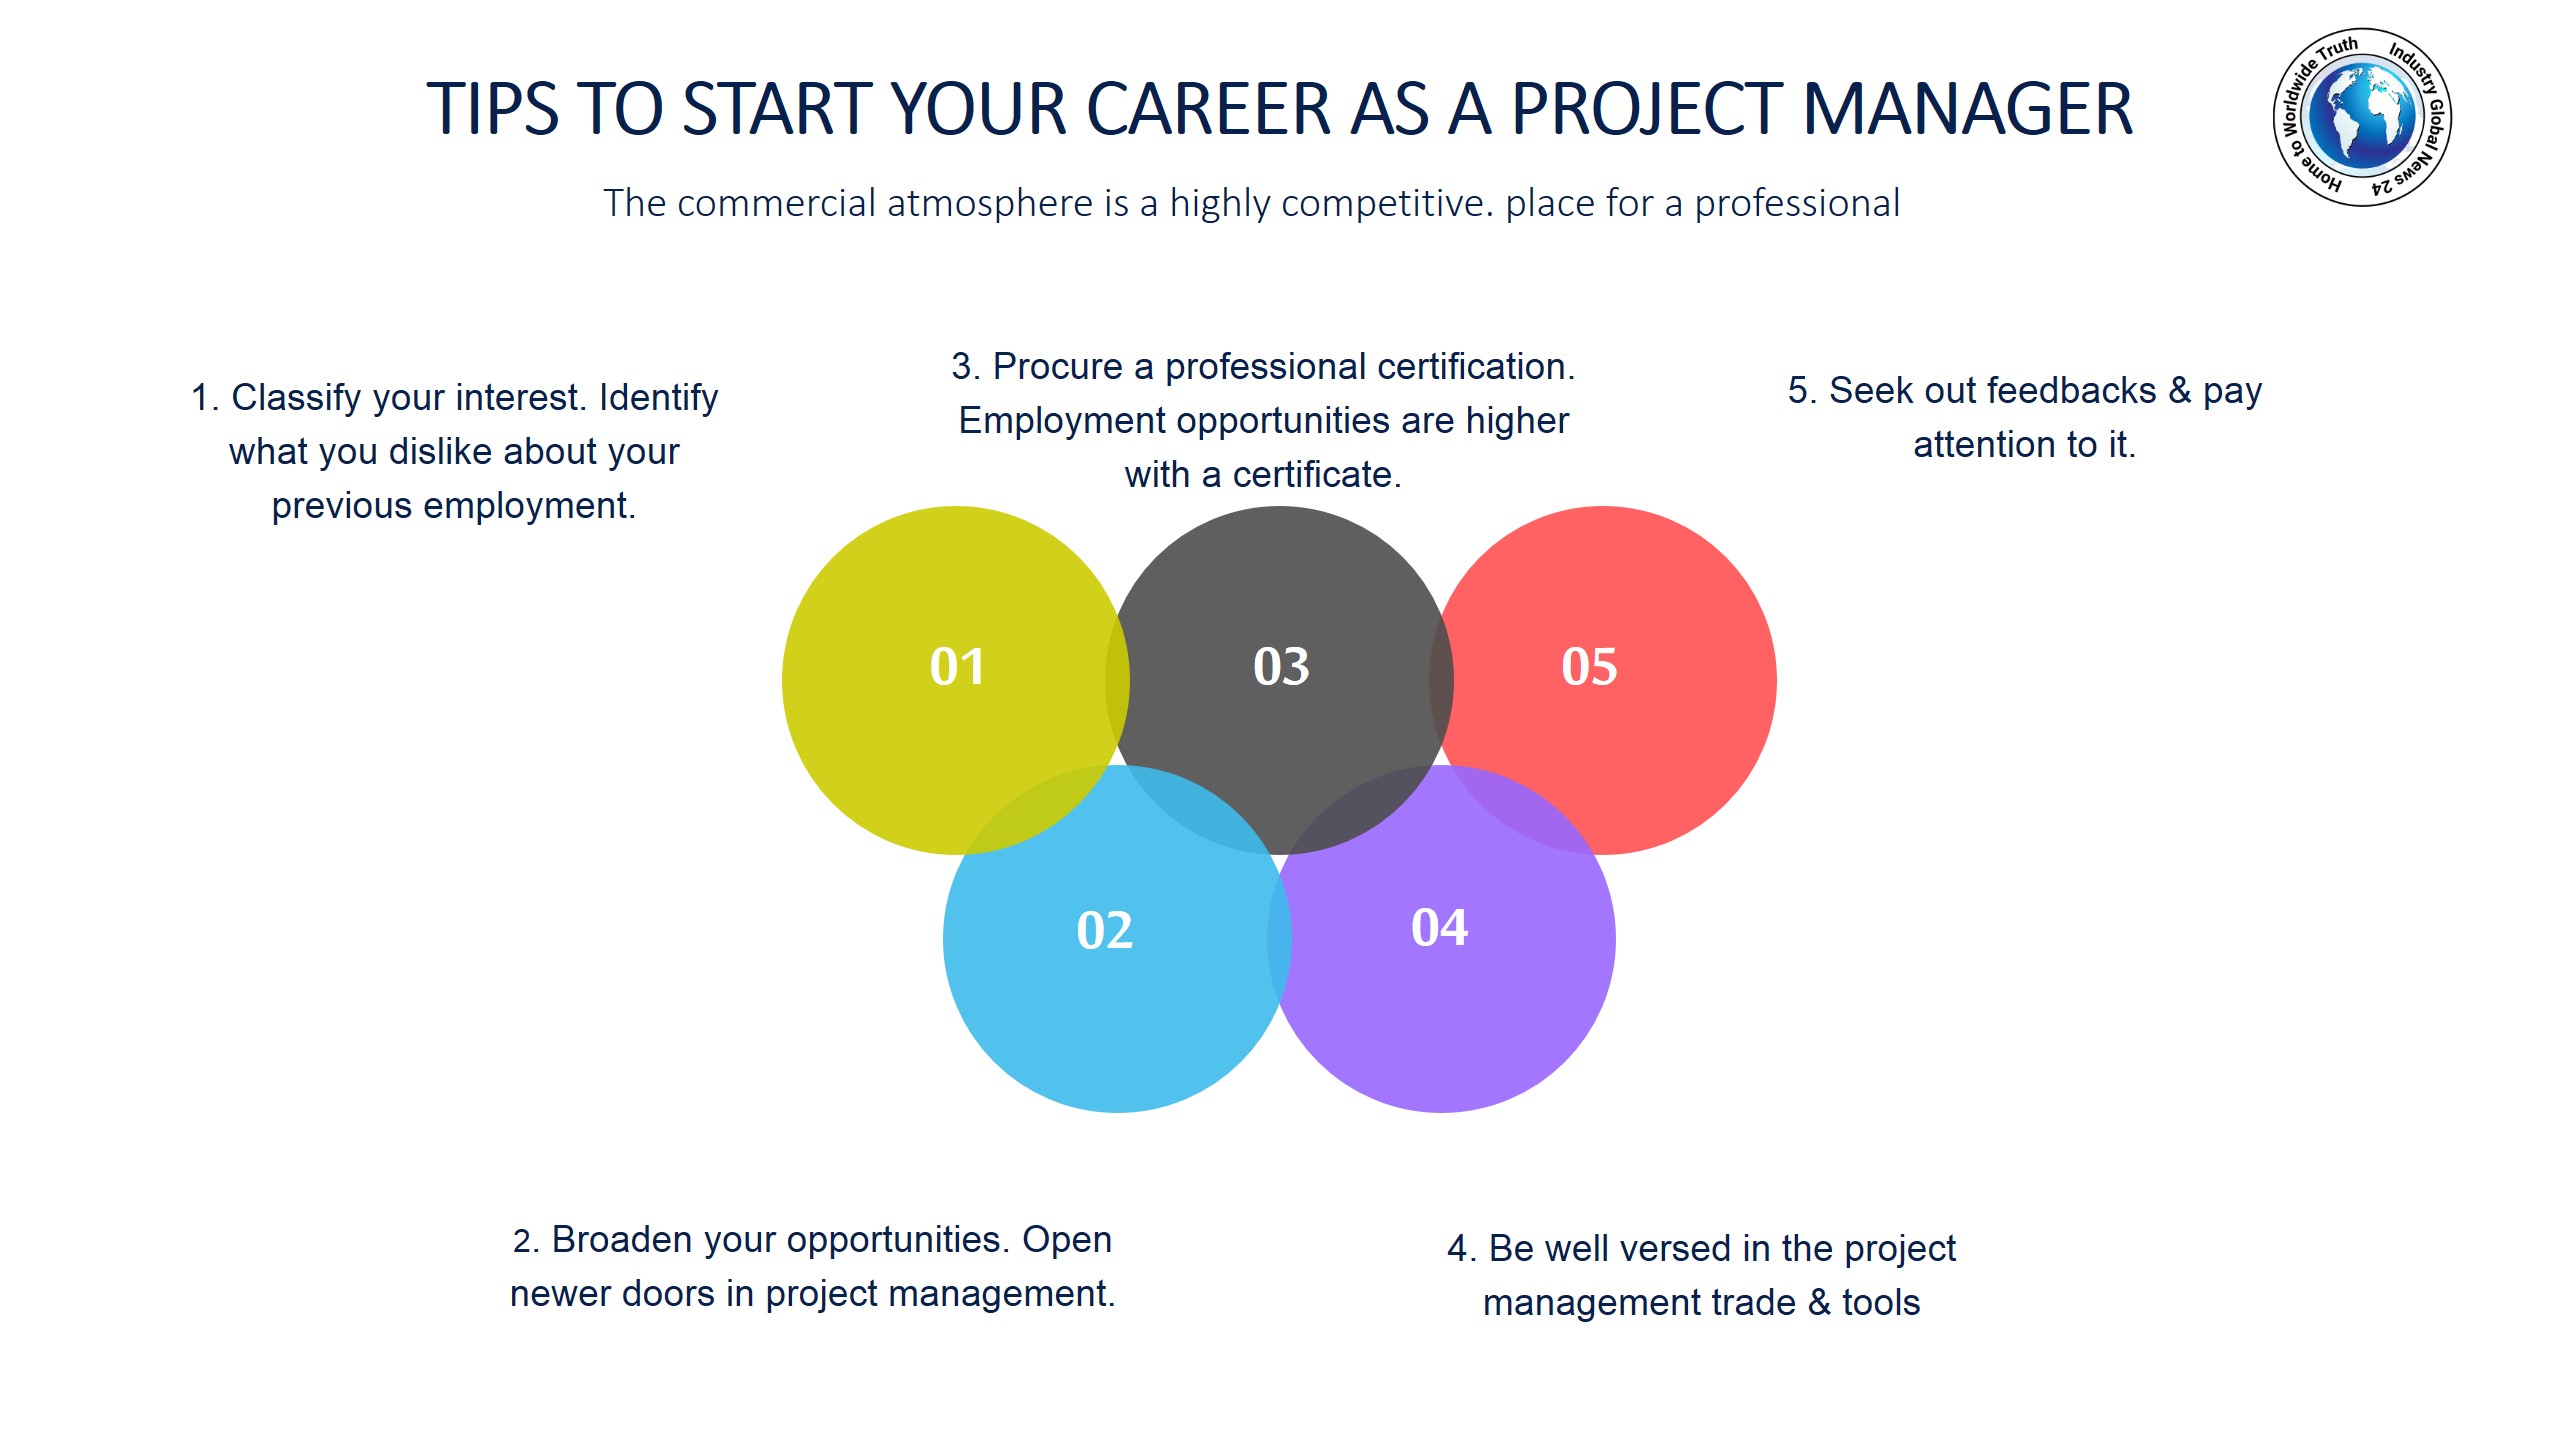 Tips to start your career as a project manager